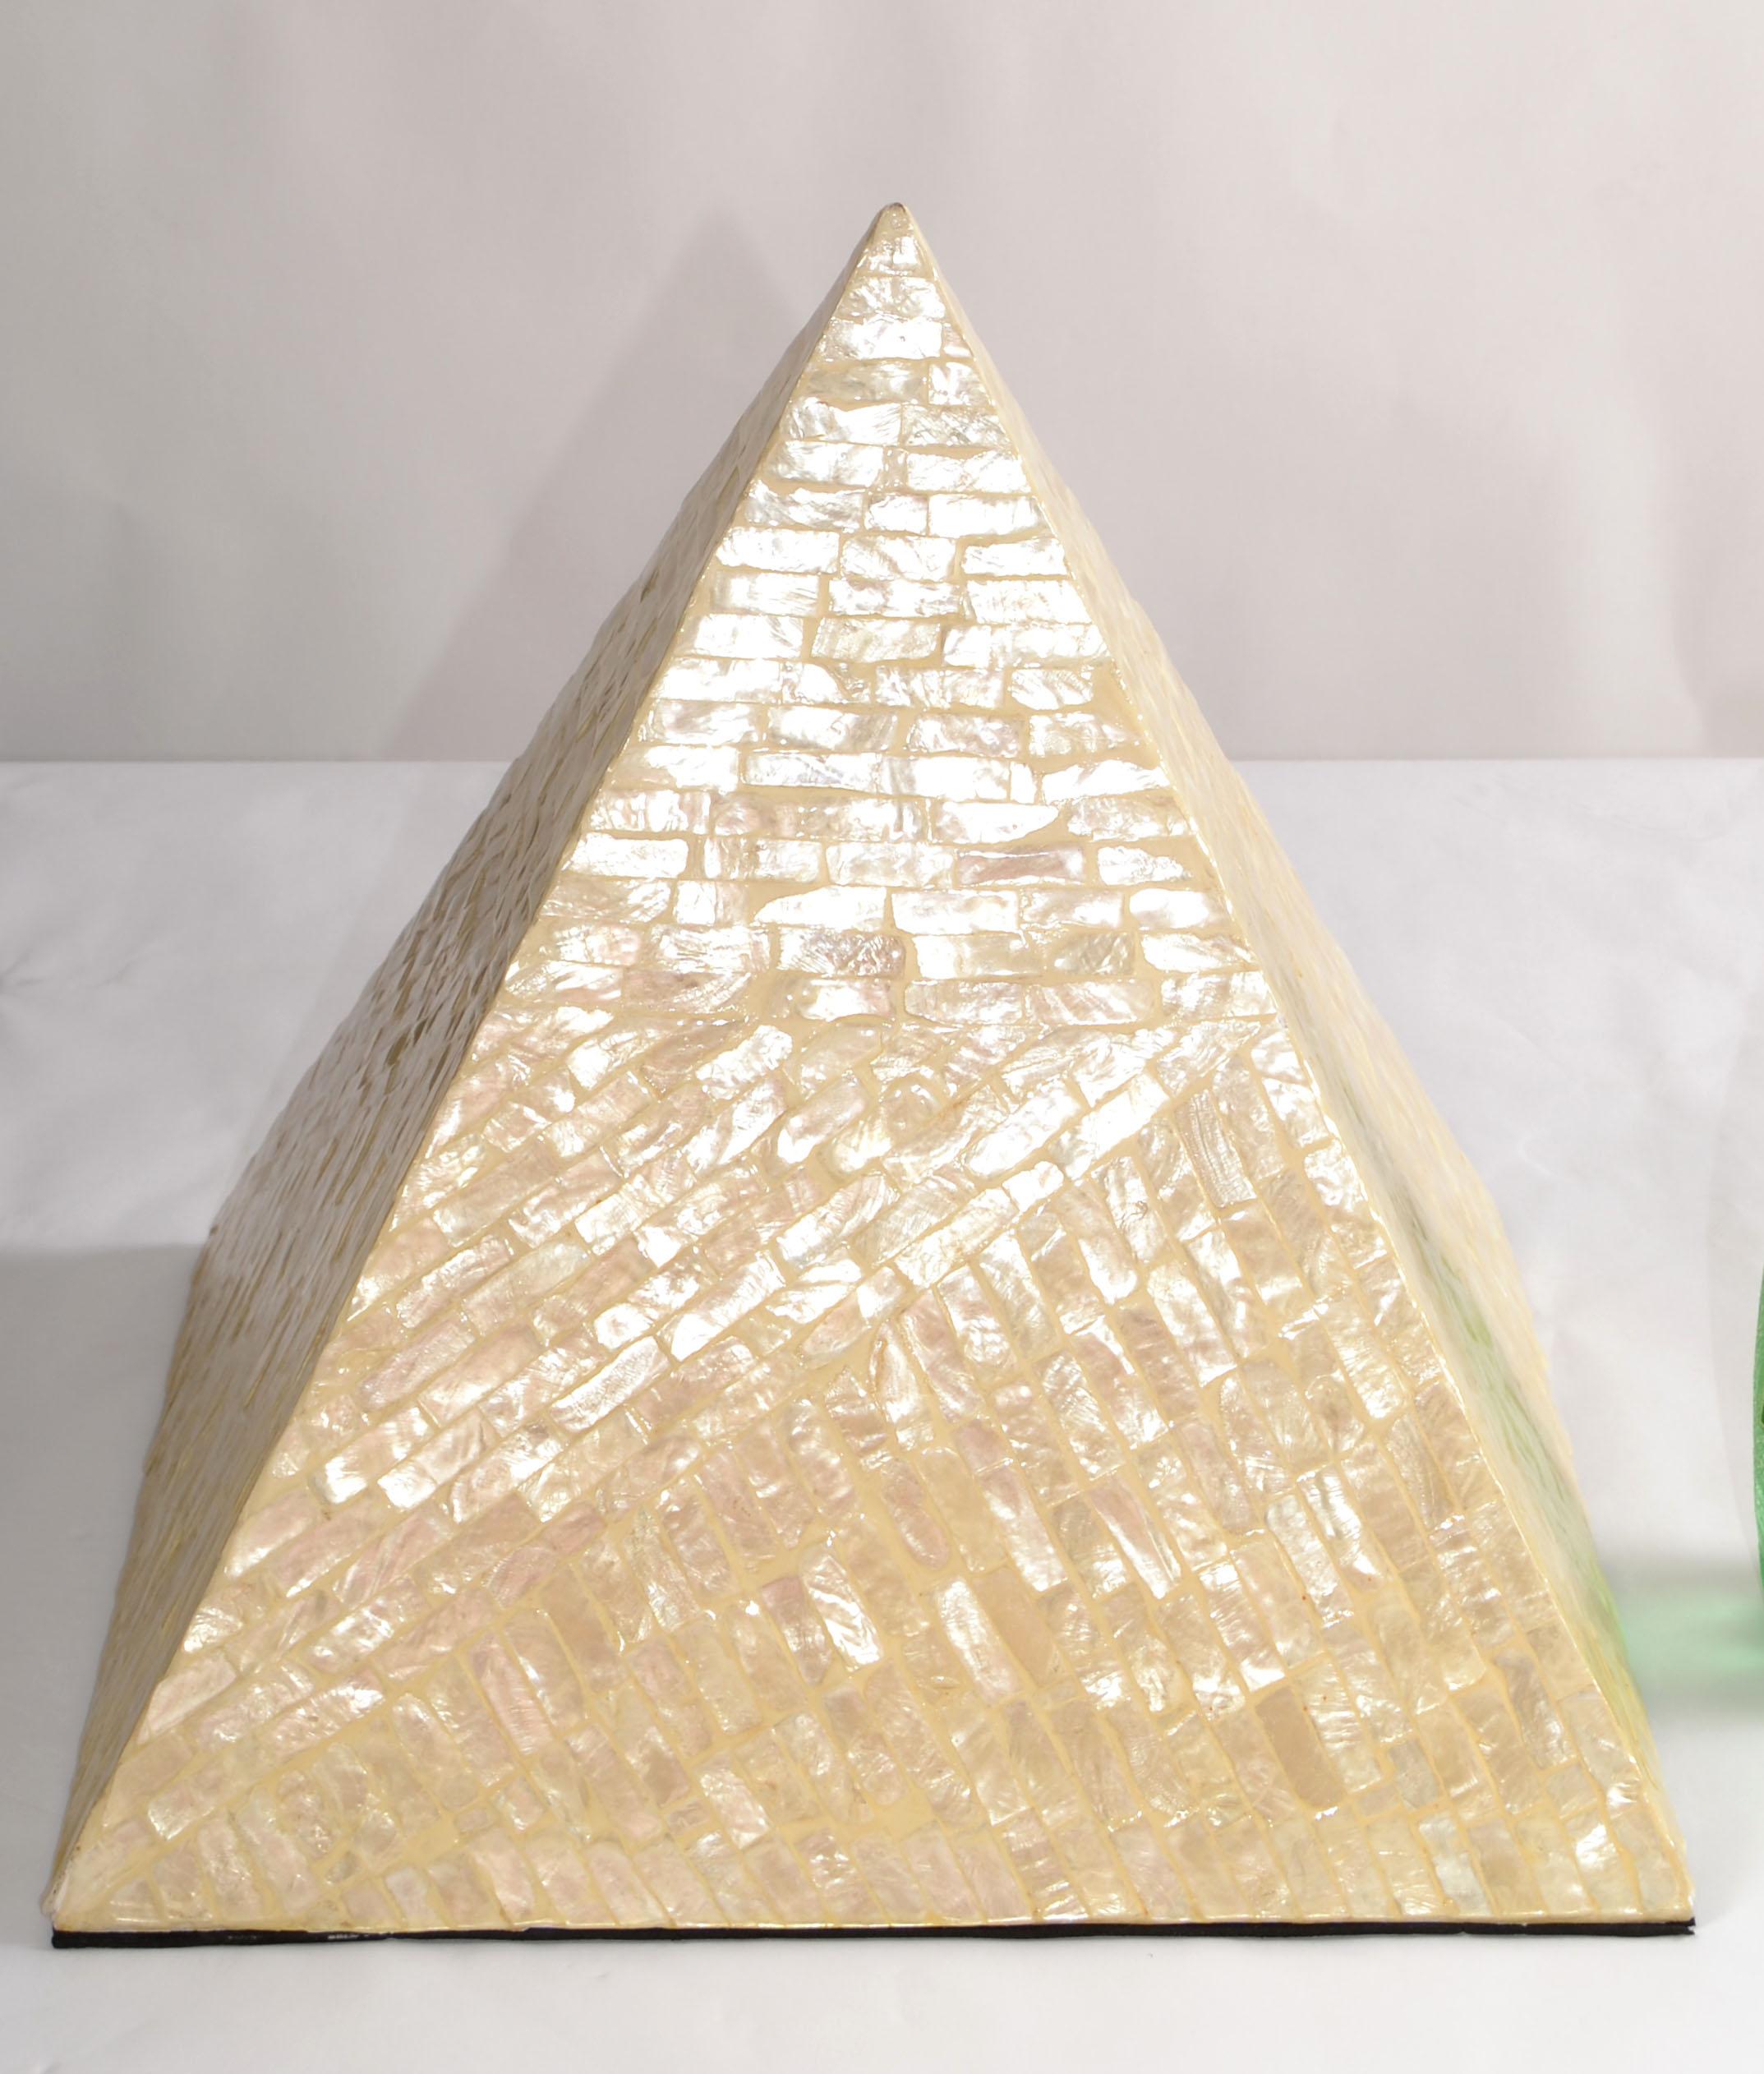 Hand-Crafted 1980s Italian Pyramid Mother Of Pearl Wood Sculpture Decorative Object Fine Art  For Sale